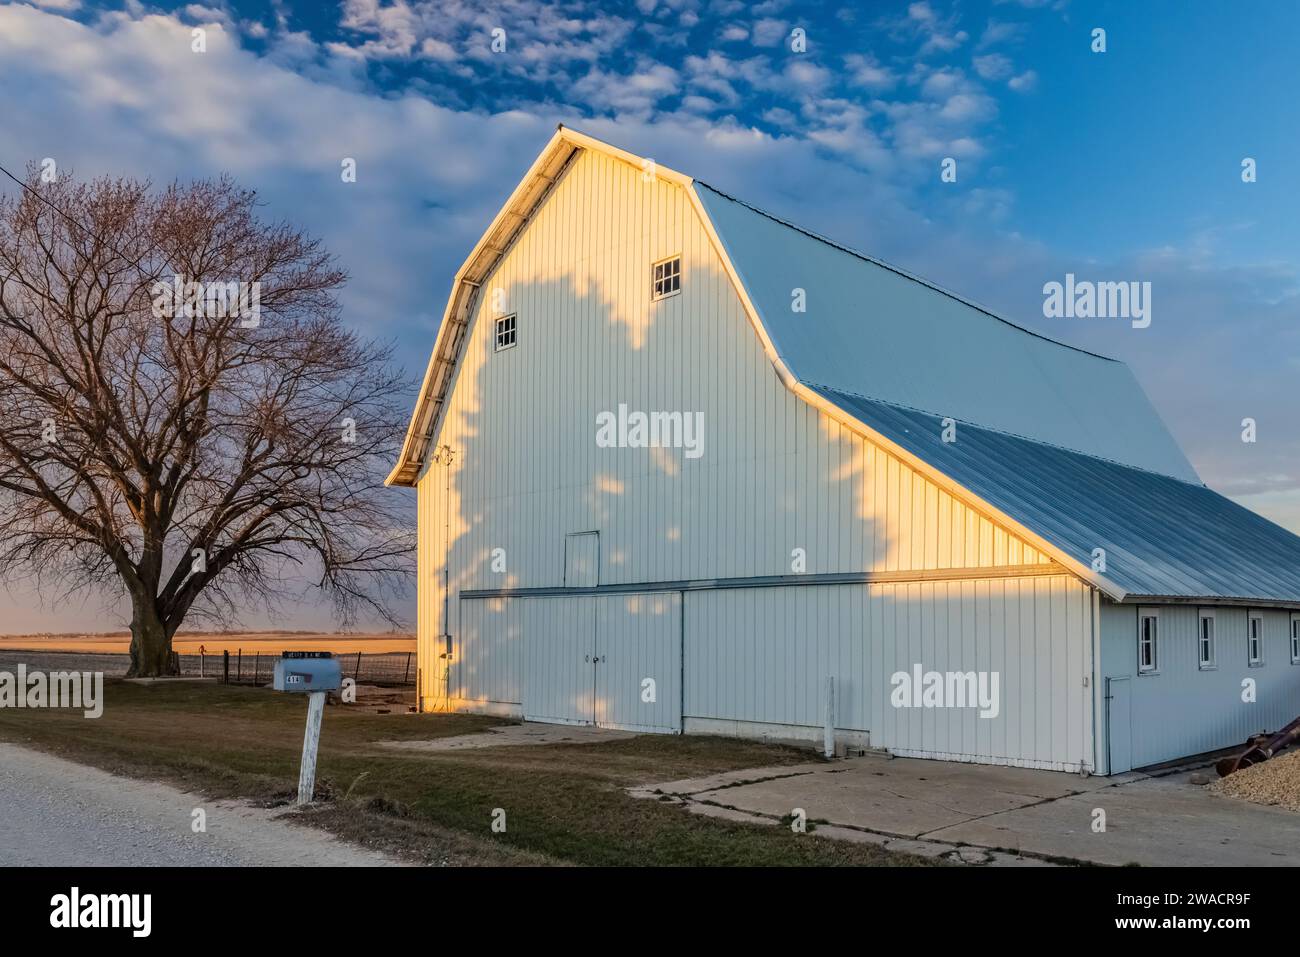 Barn with conifer shadows near Mechanicsville, Iowa, USA [No property release; editorial licencing only] Stock Photo